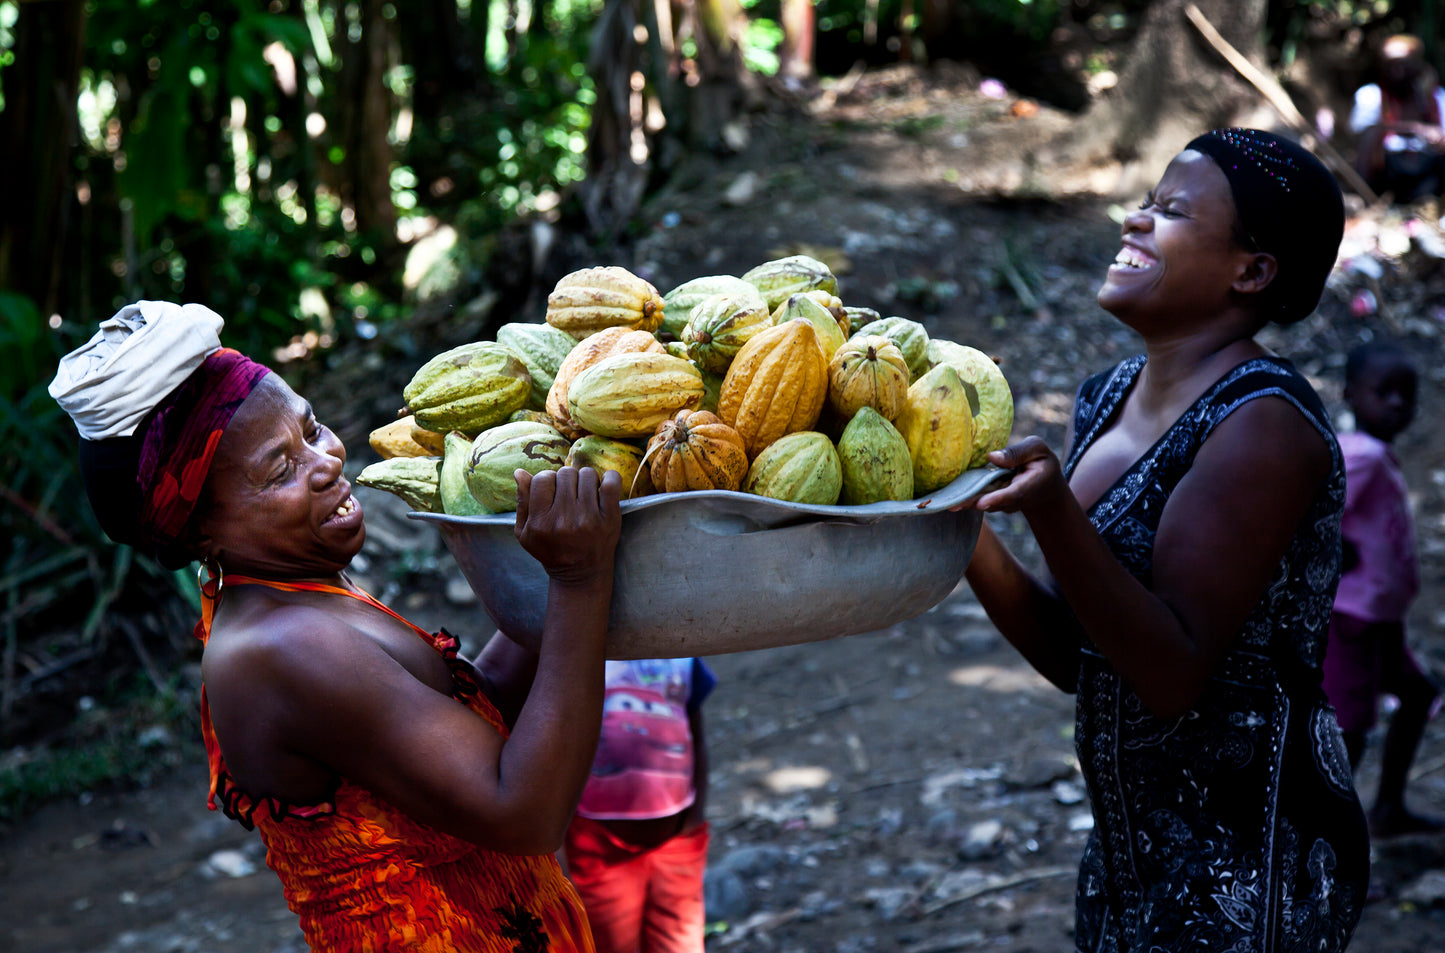 Askanya Chocolates pays local Haitian farmers 2 to 3 times the going rate